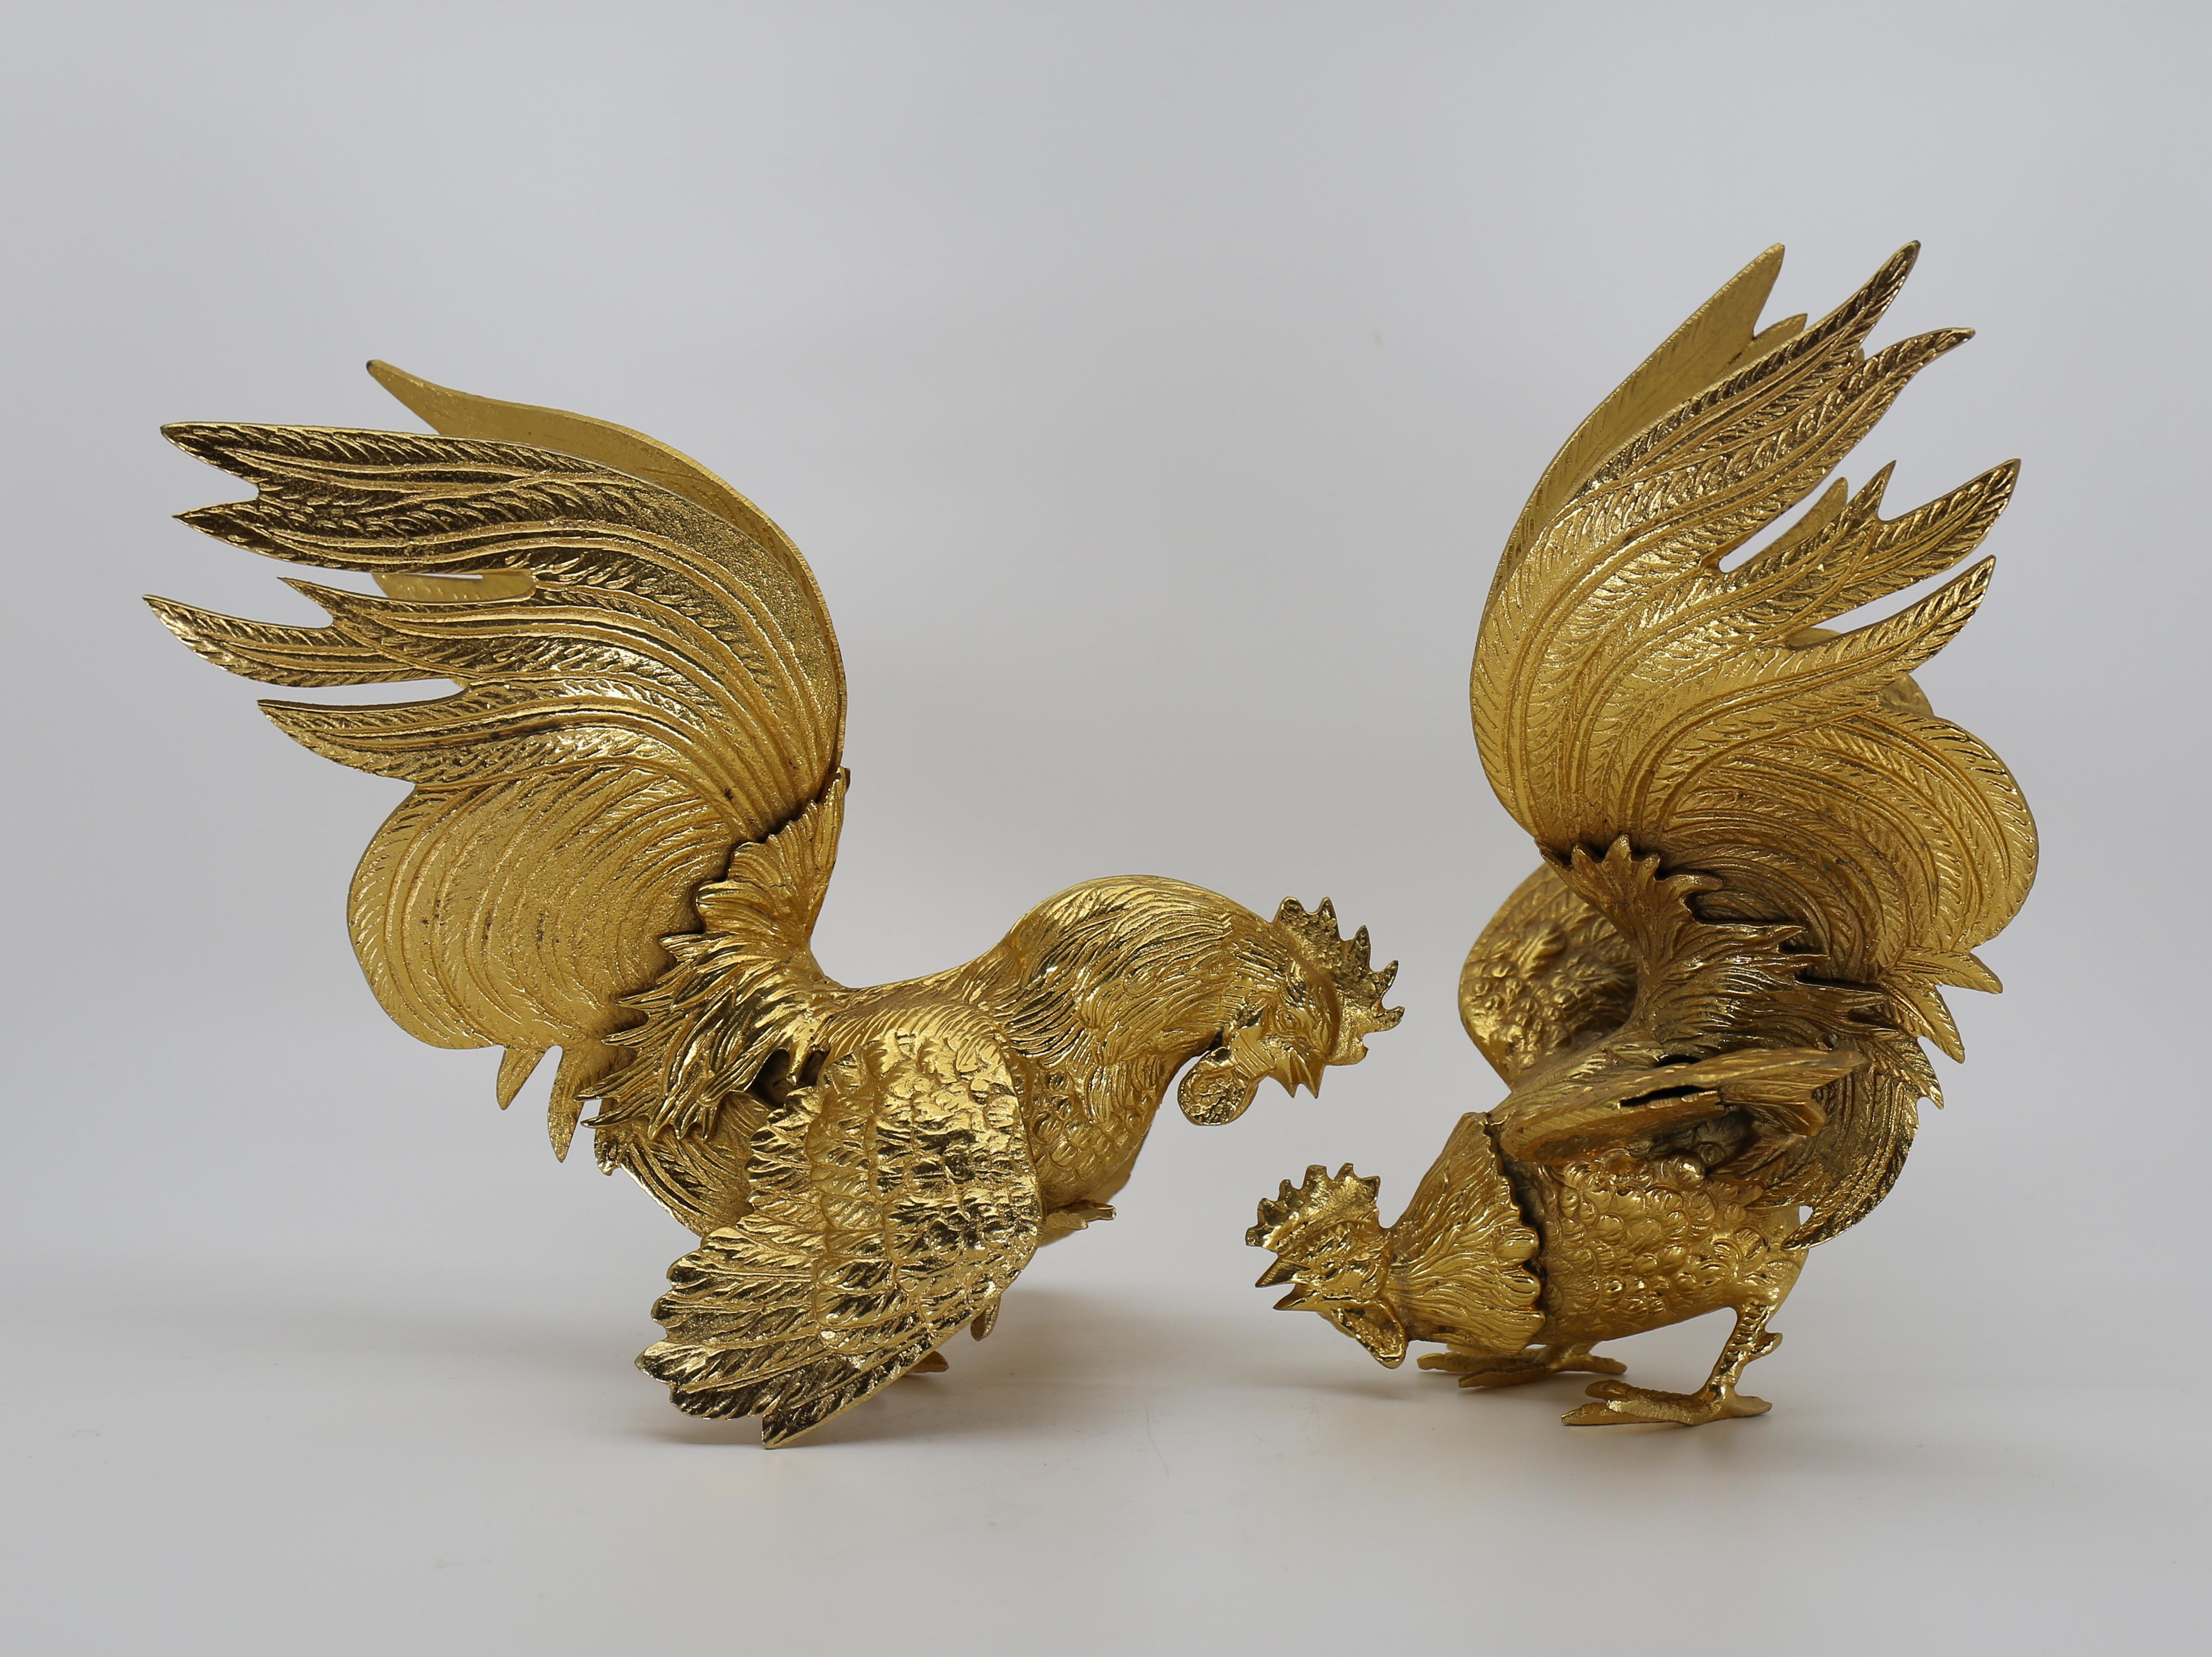 Majestic Gilt Brass Rooster Cock Figurines, Set 2, France, 1960s.  Highly detailed gilded brass rooster figurines.  Vintage figurines have a classic design and are handmade from natural and sustainable material which is resistant to impacts,